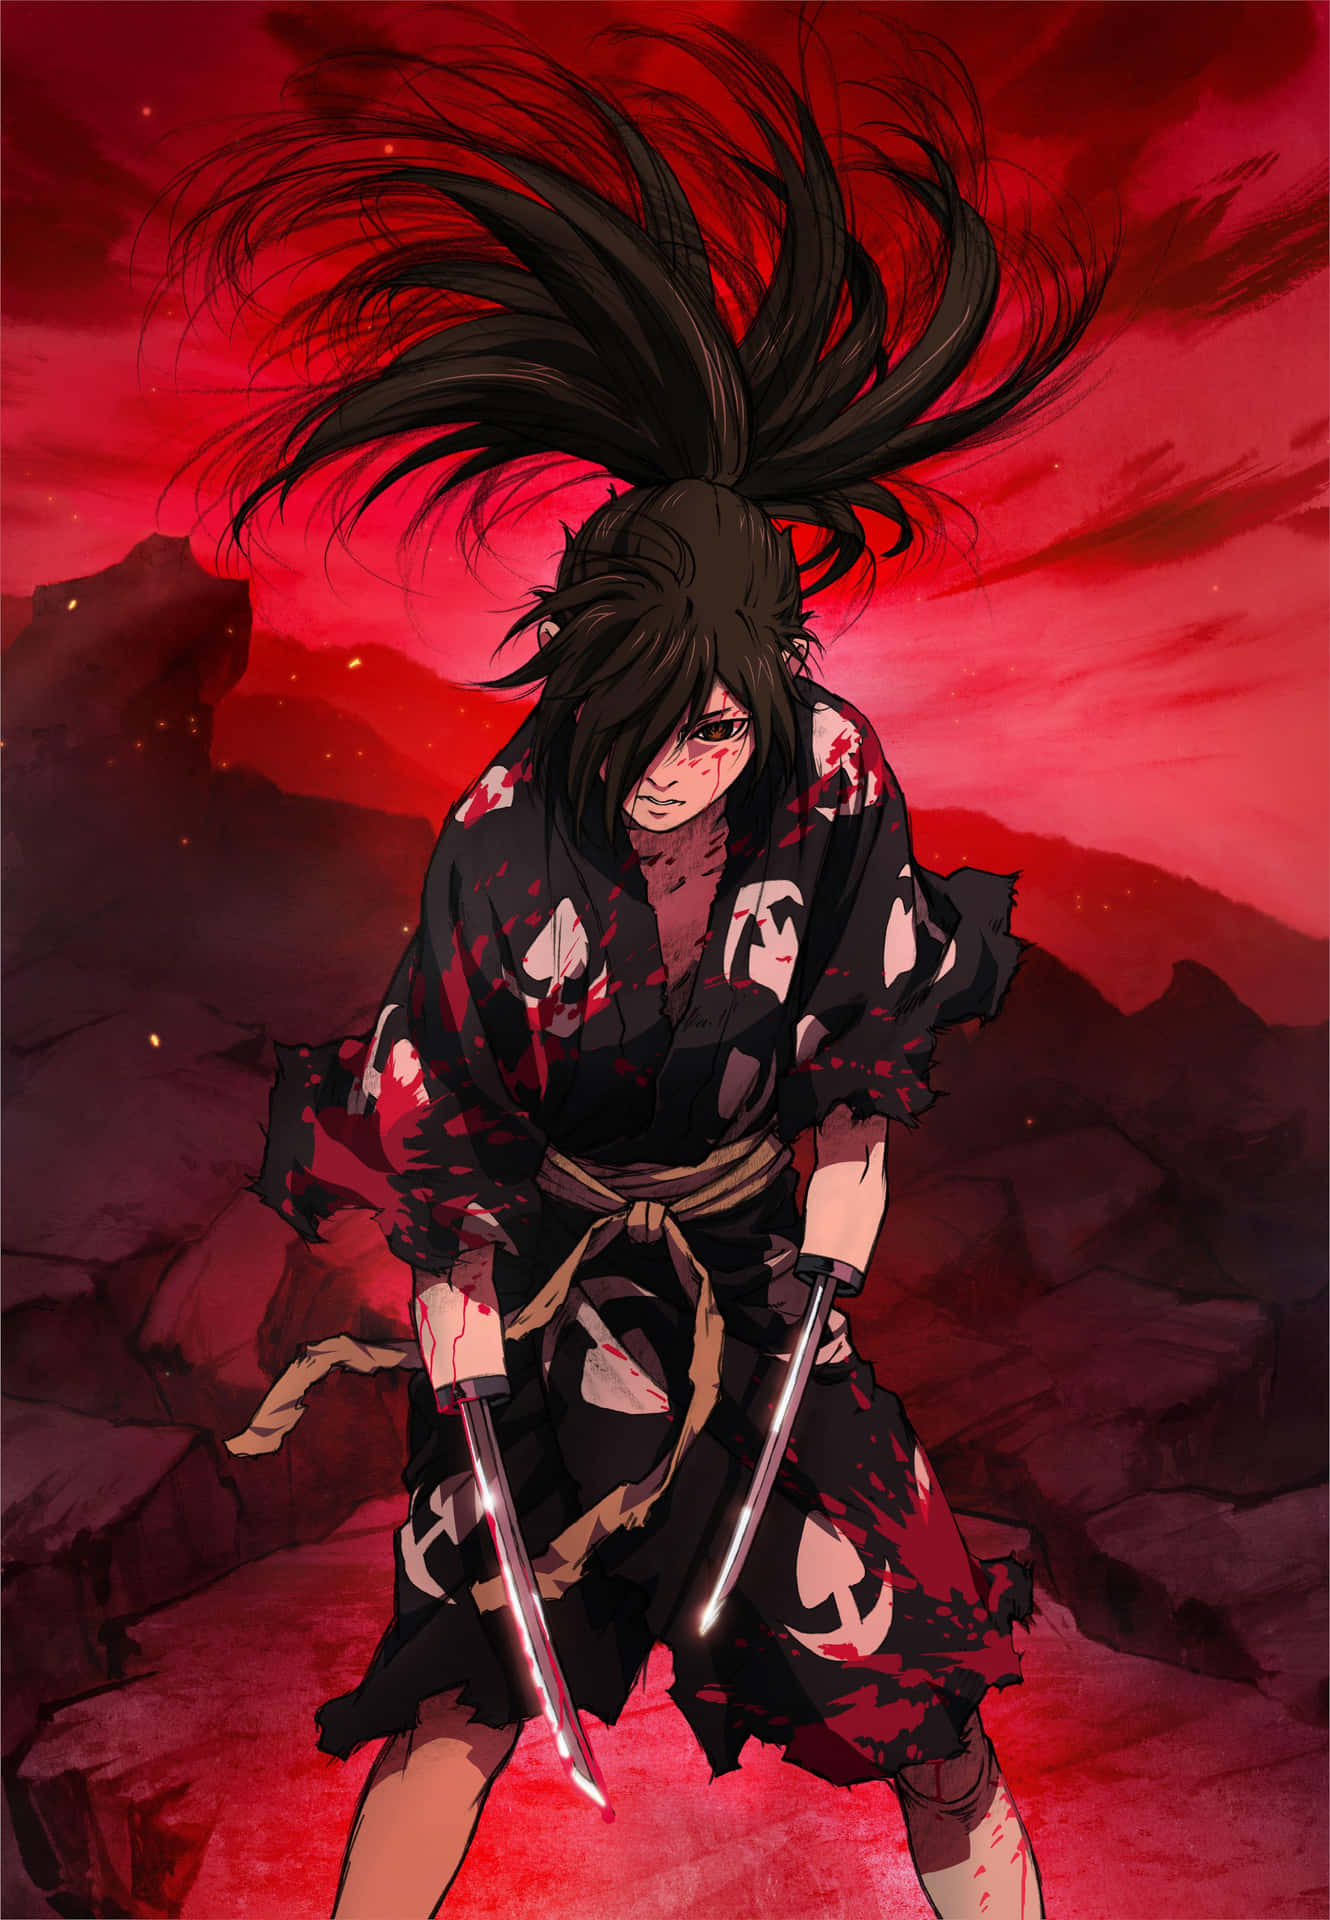 Dororo, the young samurai hybrid, about to take on the demons of the local darkness